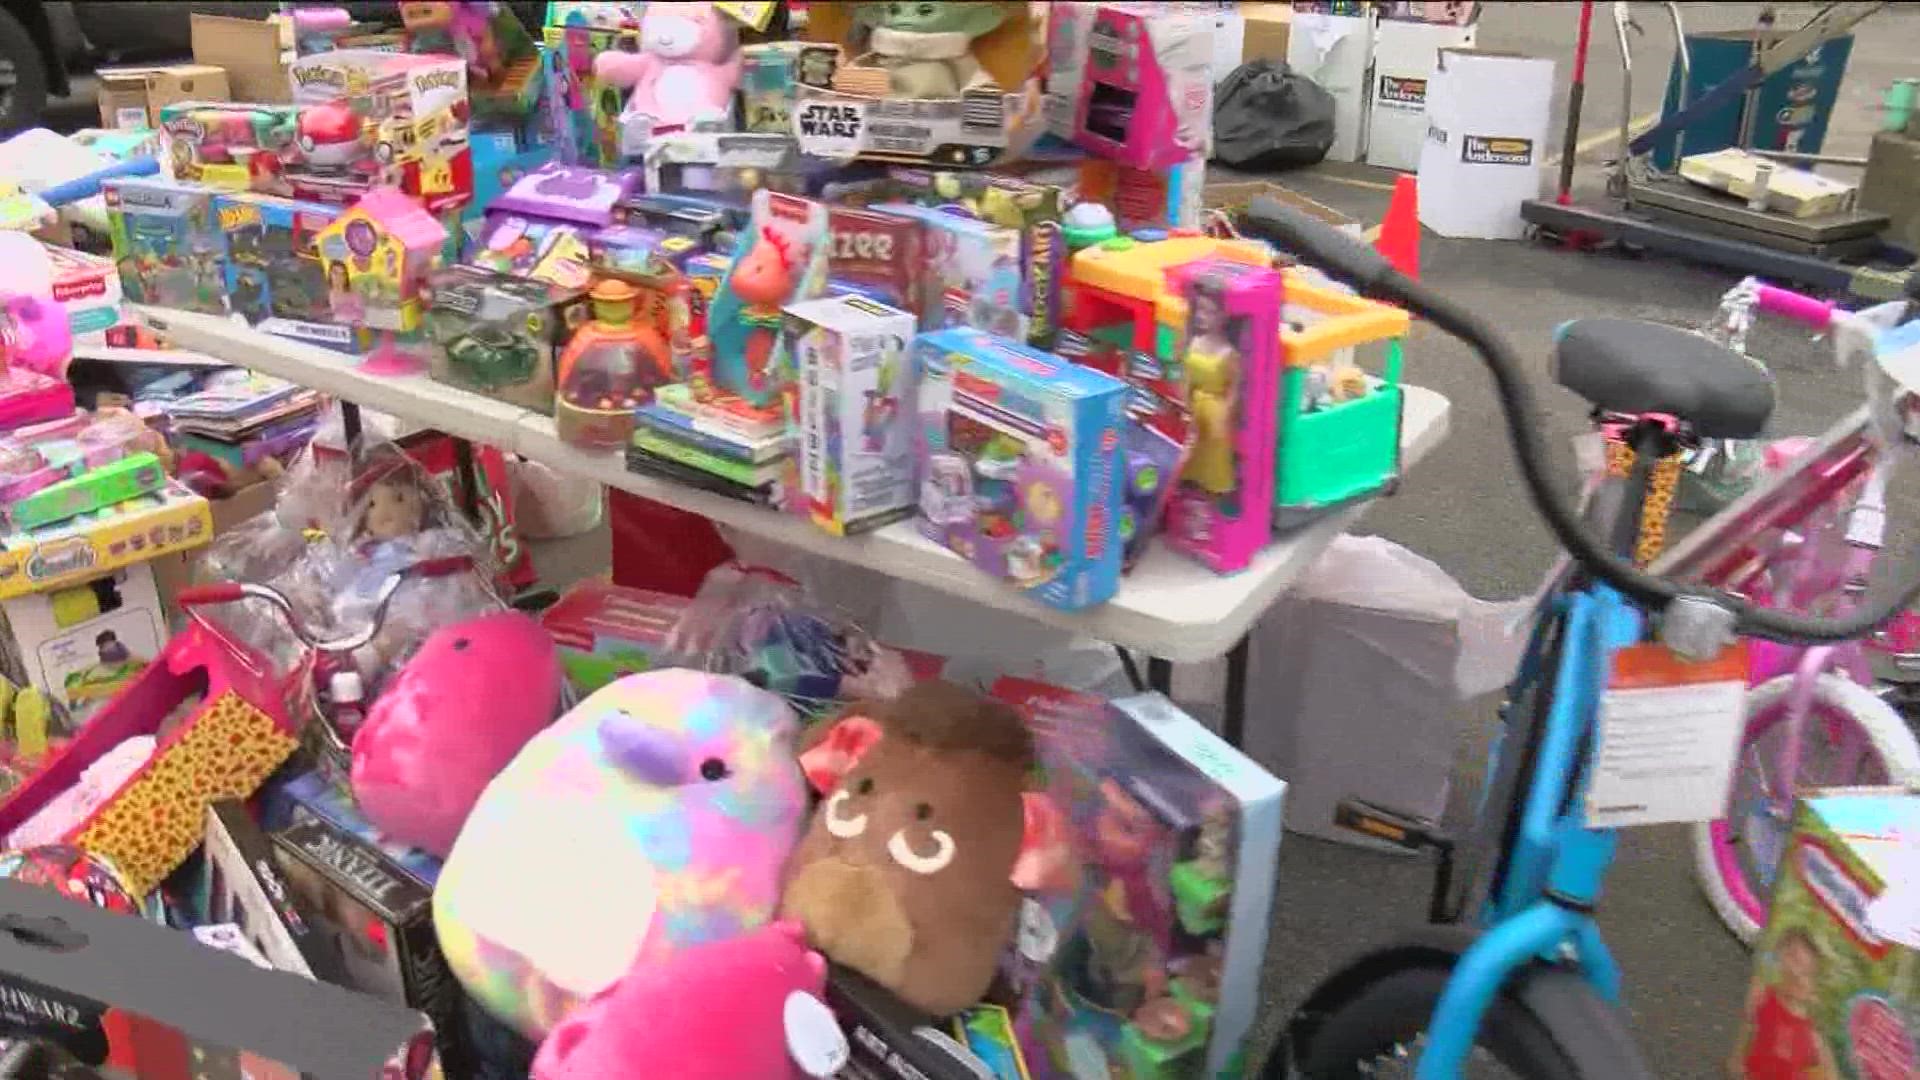 The toys will be distributed to Lucas County children in foster care.